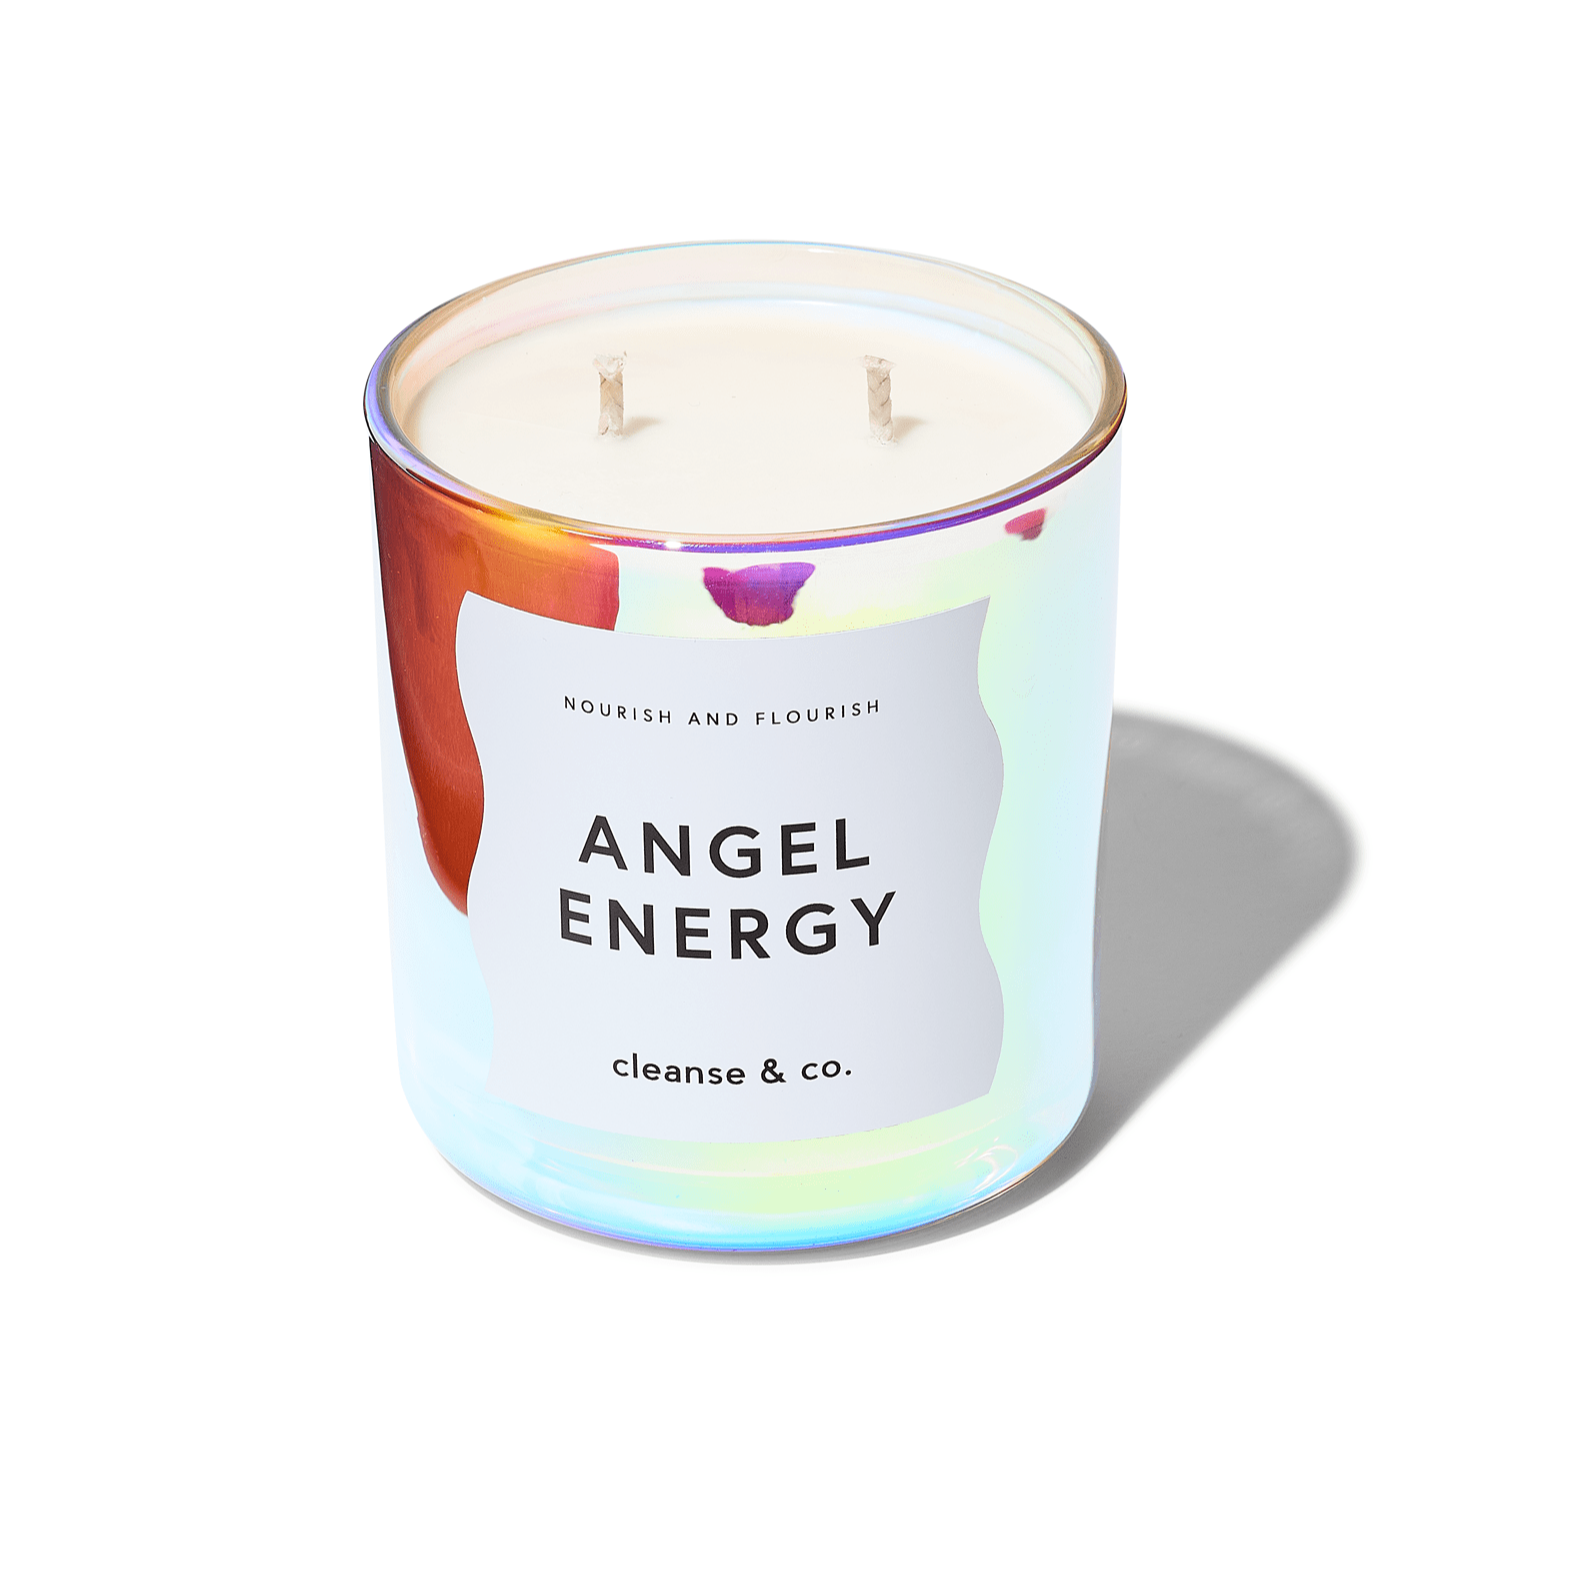 Angel Energy Limited Edition Candle - Nourish & Flourish 400G / Marine Moss & Melon by Cleanse & Co.